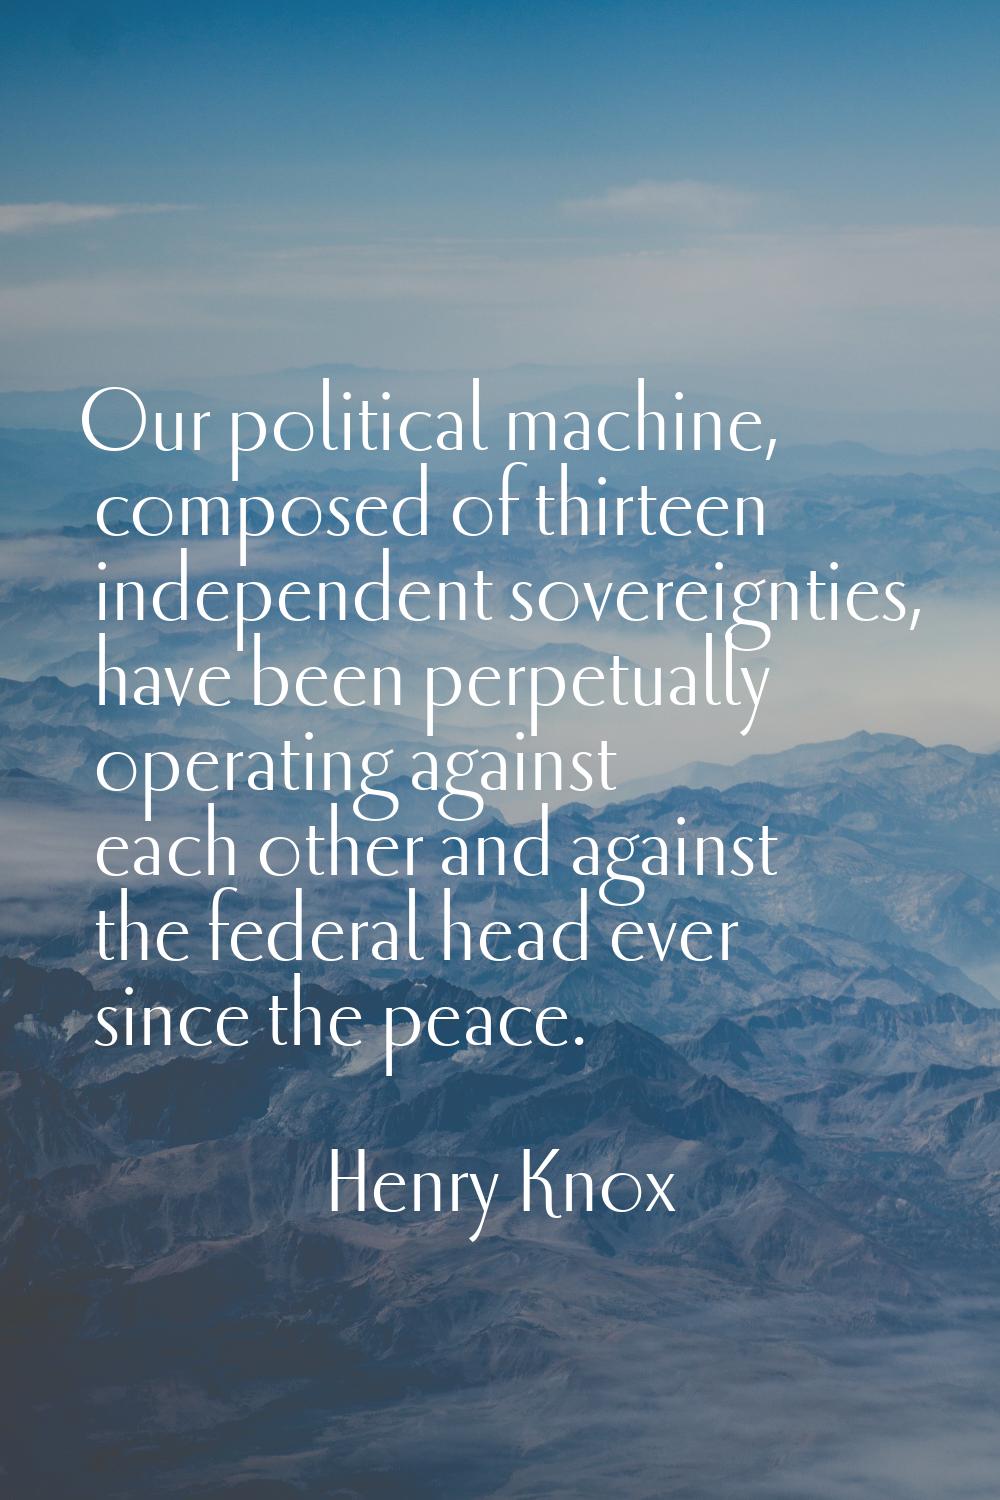 Our political machine, composed of thirteen independent sovereignties, have been perpetually operat